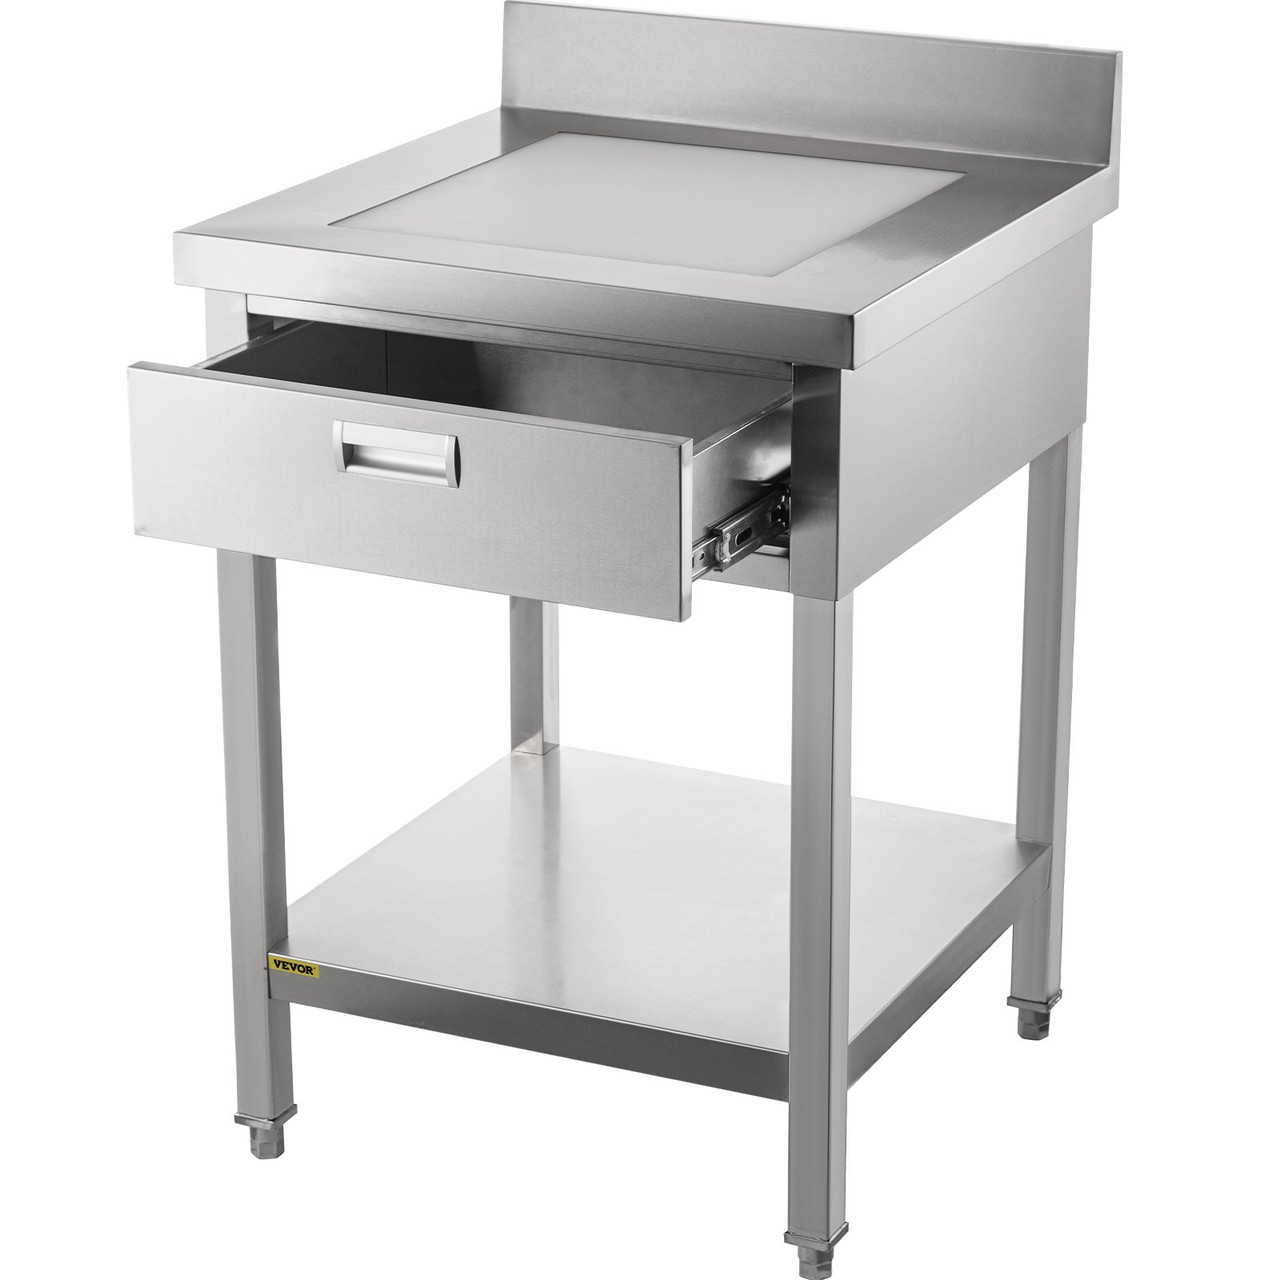 Stainless Steel Prep Table 24 x 24 in Stainless Steel Table with Drawer Kitchen Table with Undershelf and Backsplash Kitchen Island 440 Lbs Load Capacity for Restaurant, Home and Hotel